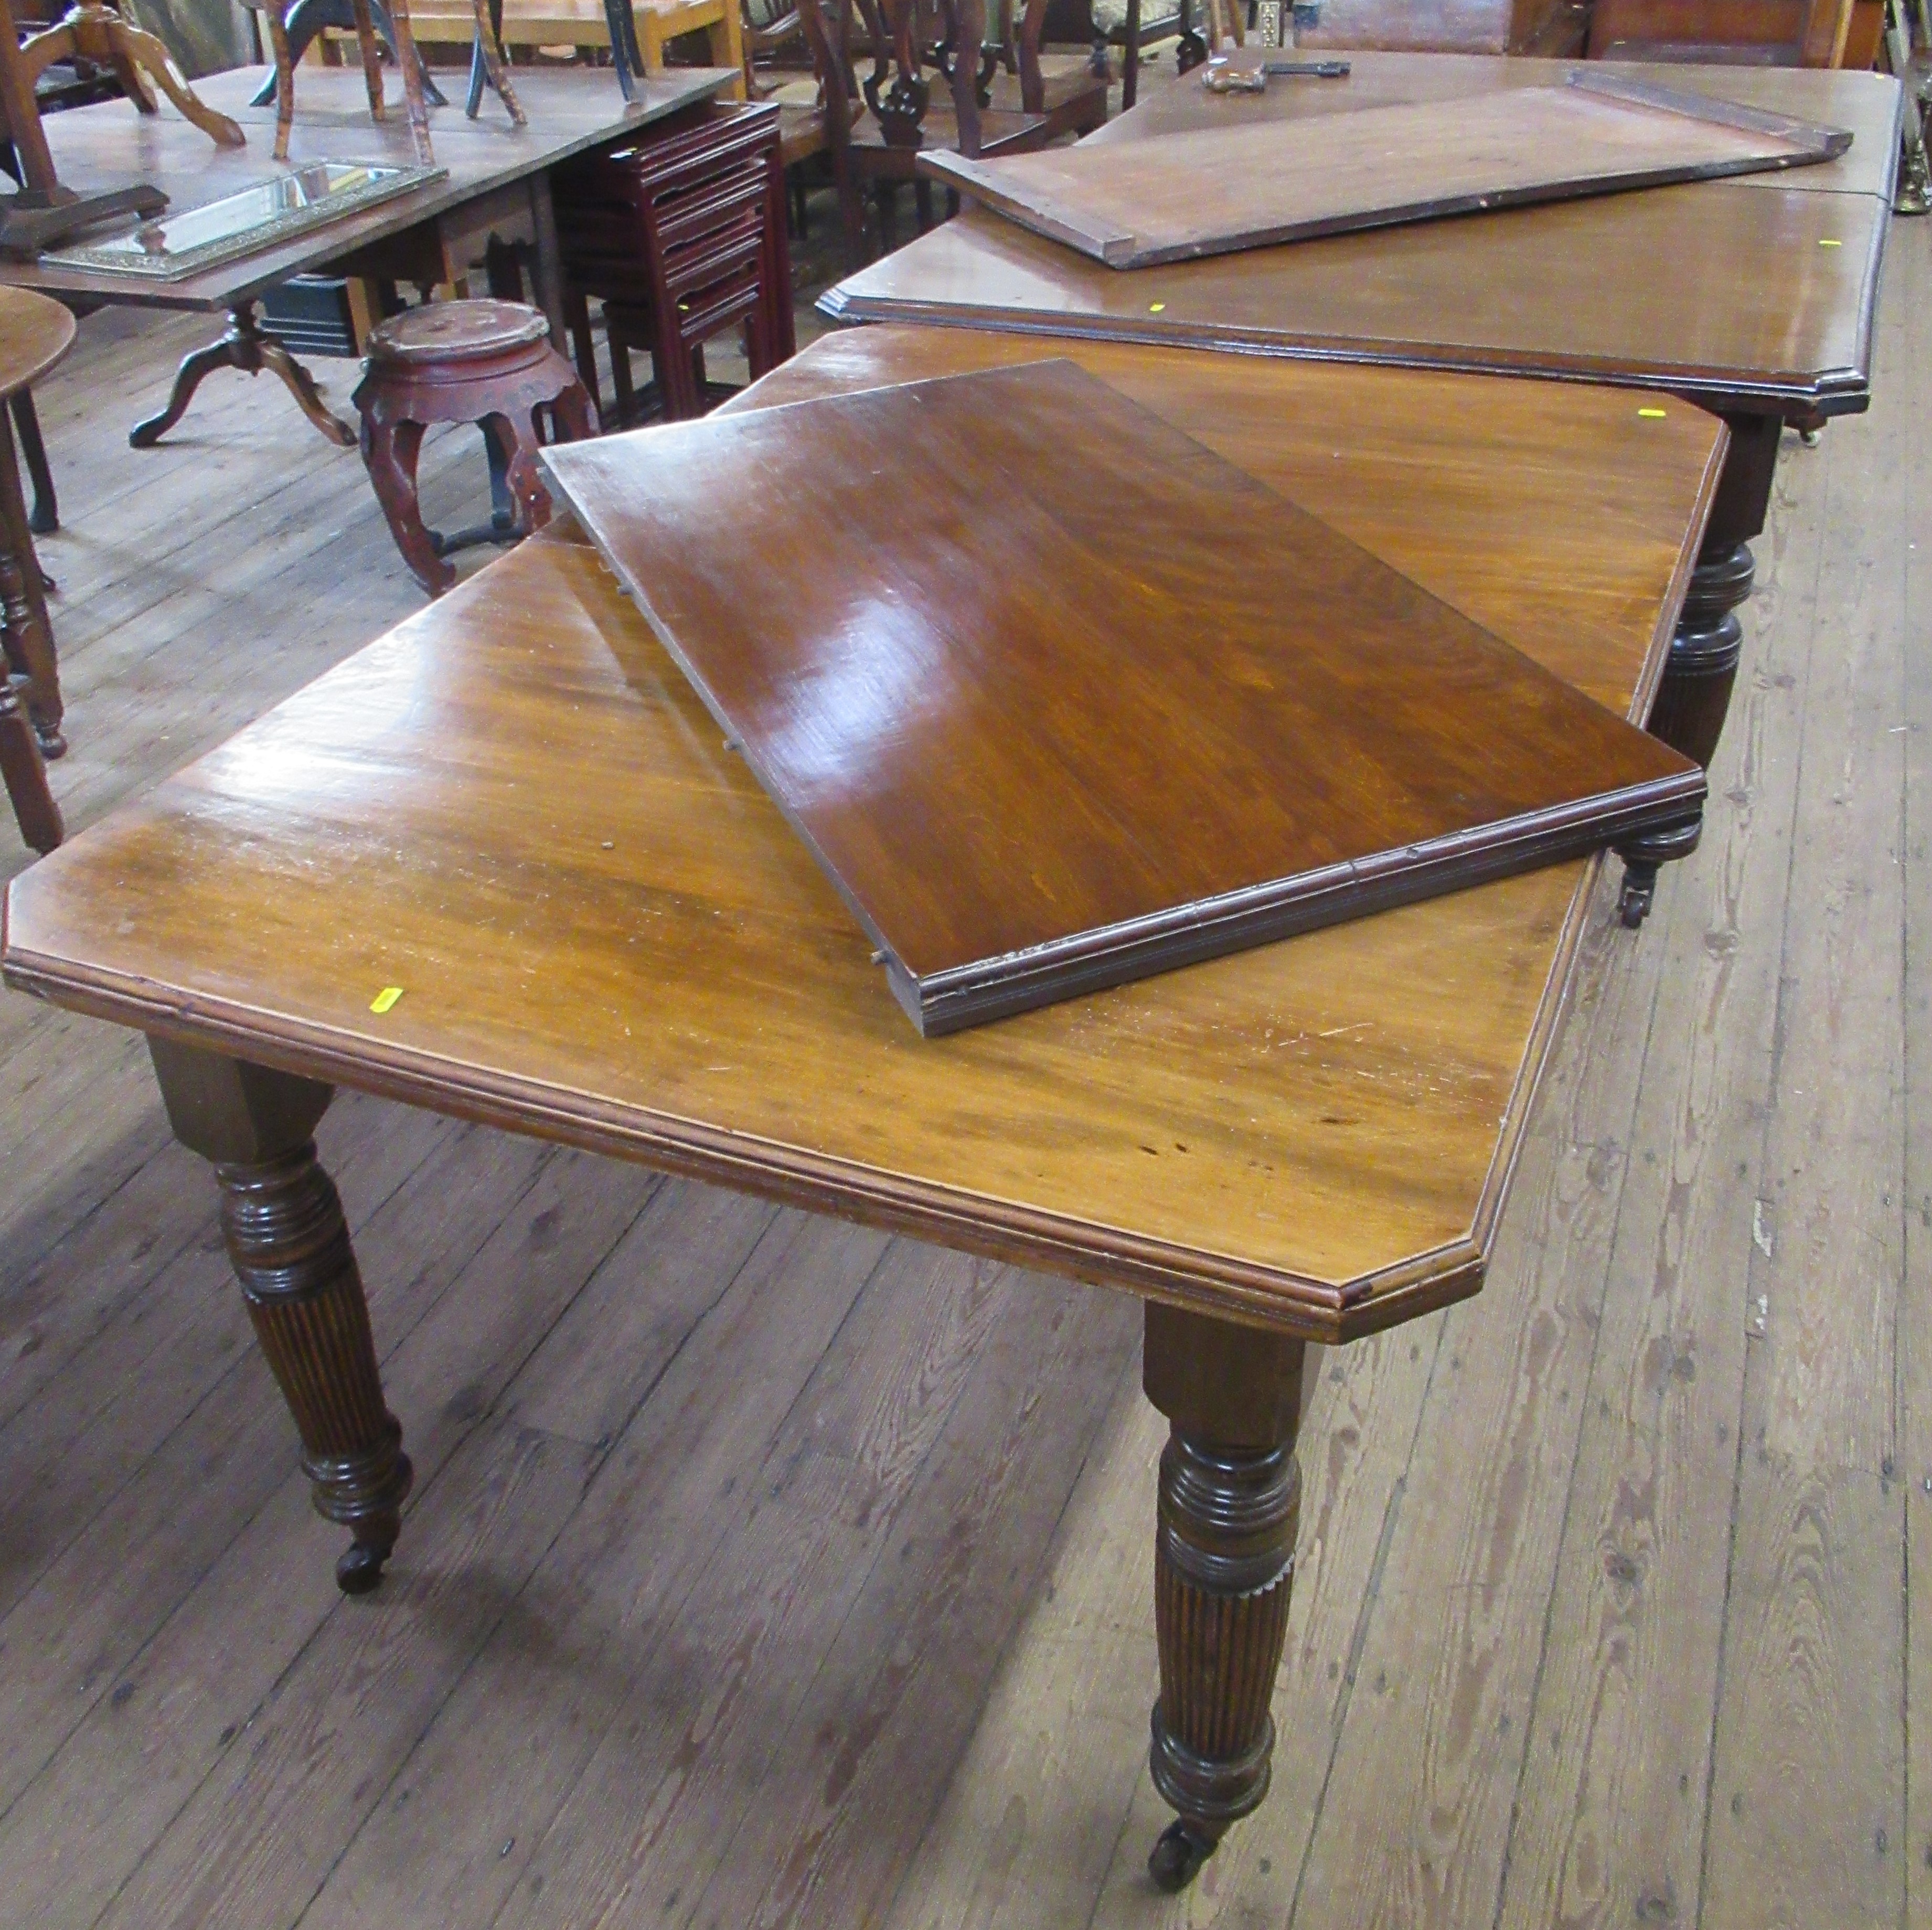 Two 19th century mahogany extending dining tables, each table has an extra leaf and handle, total